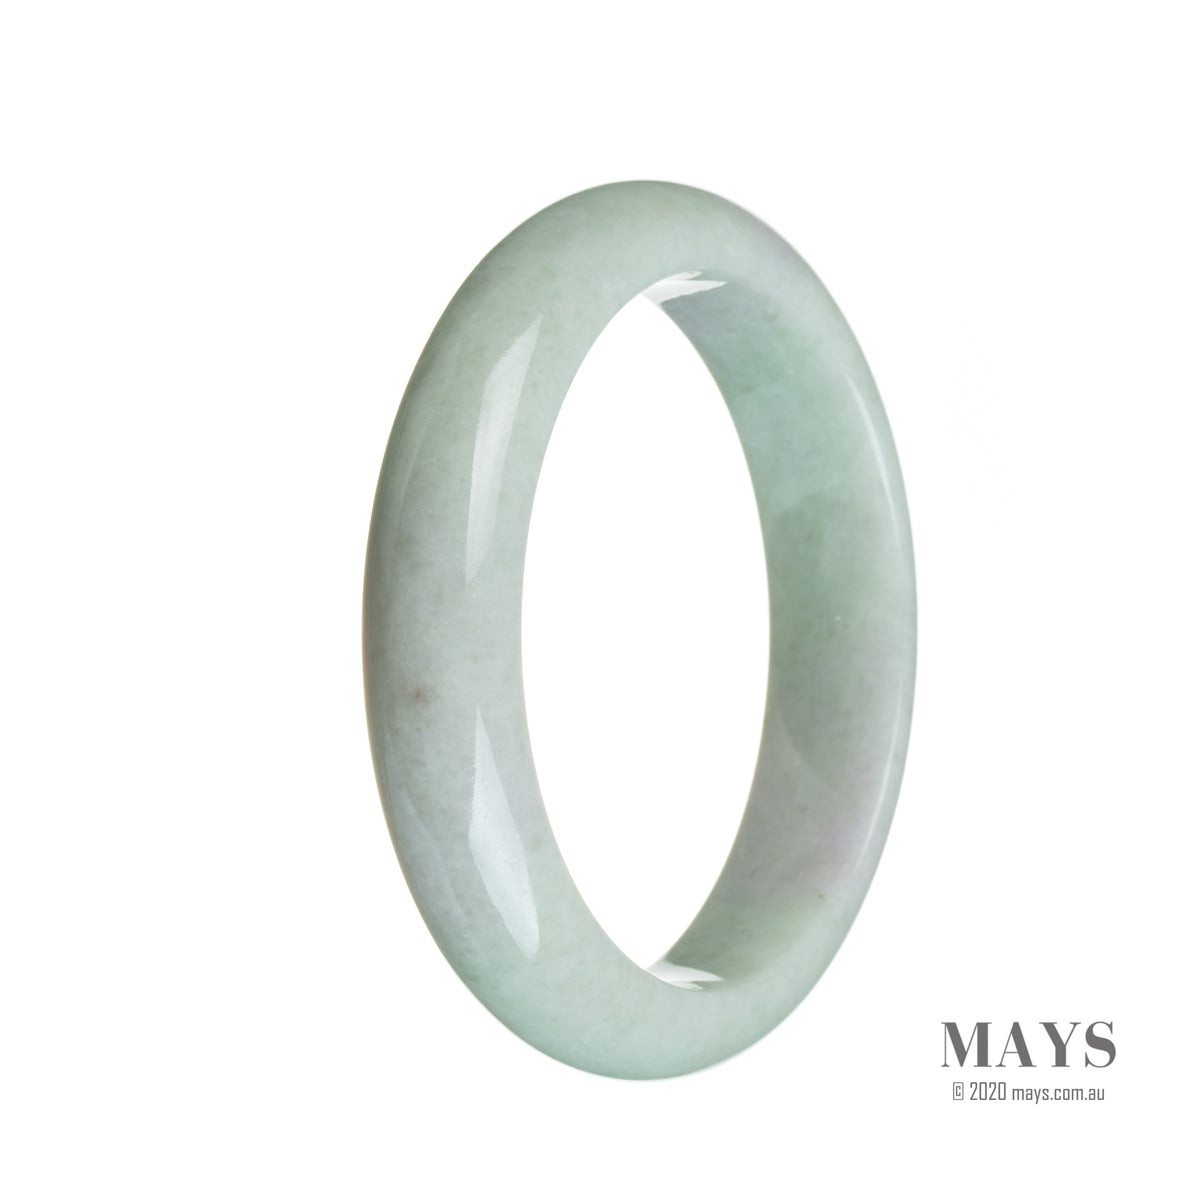 A stunning pale lavender and green Jadeite Jade bracelet in a half moon design. The untreated jade stones are beautifully showcased in this unique piece of jewelry.